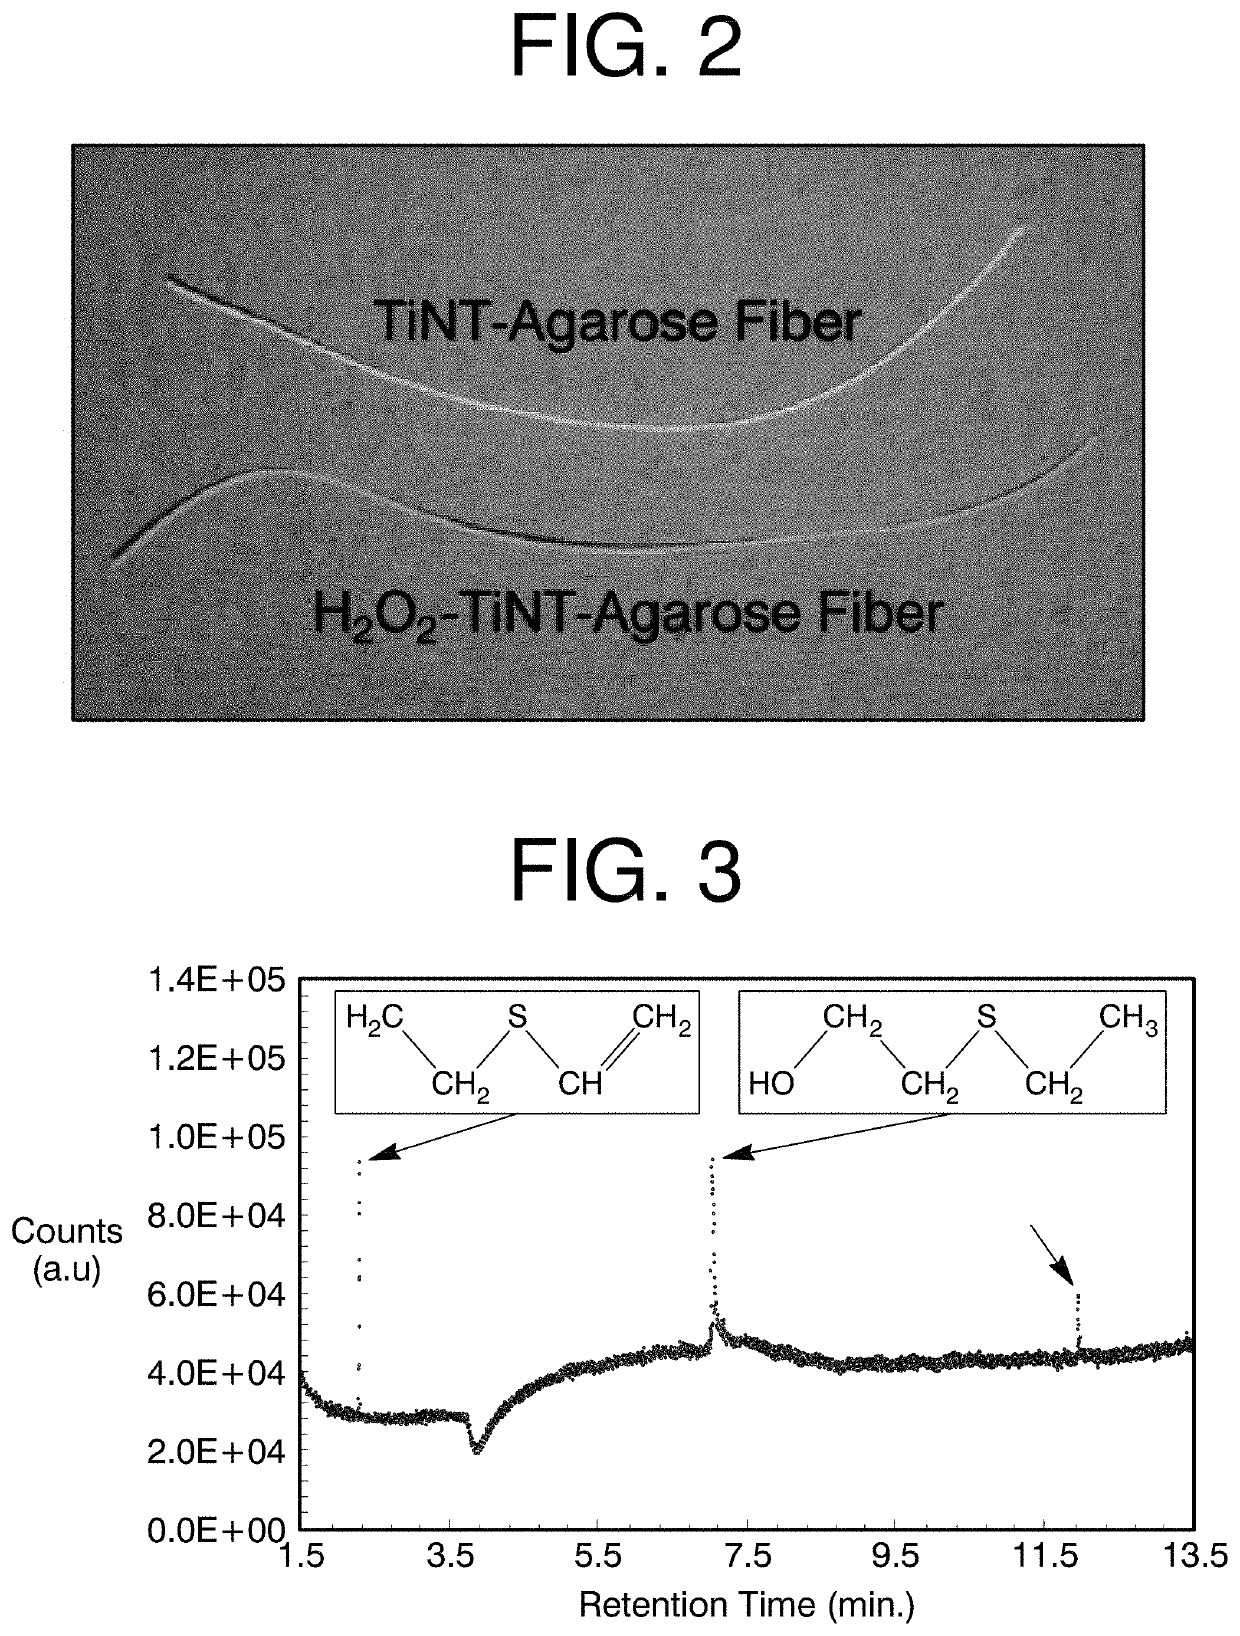 Single threaded composite fibers and yarns for the degradation of and protection against toxic chemicals and biological agents